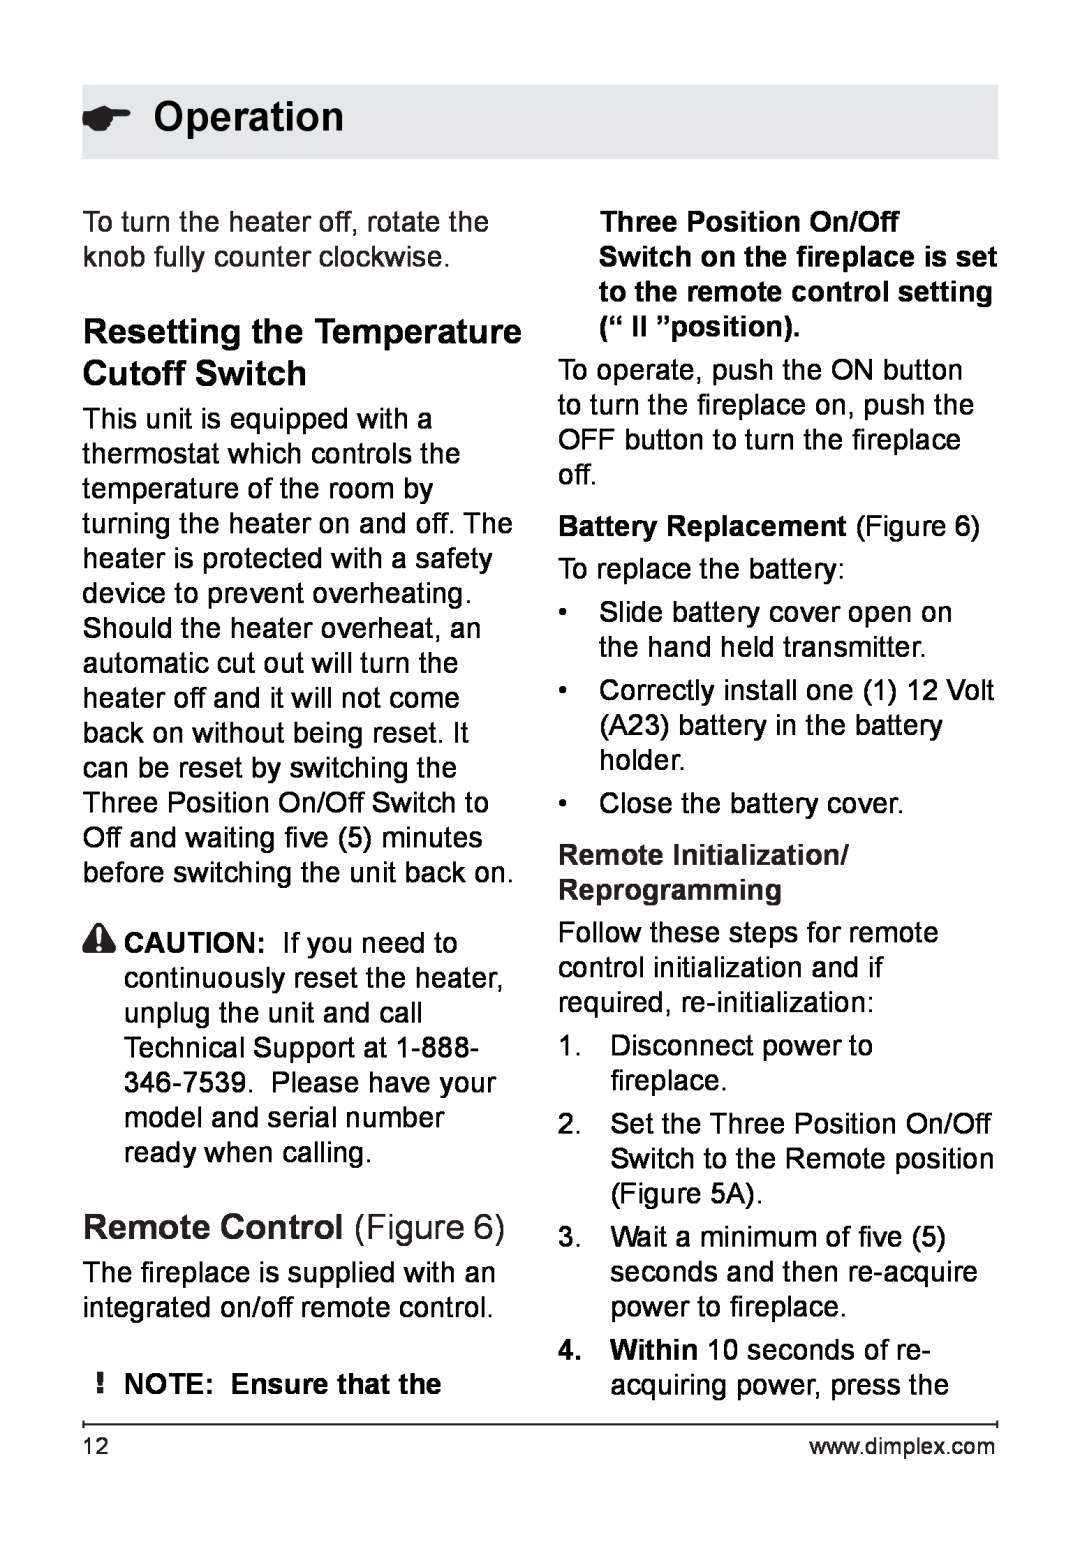 Dimplex NBDF2608, DF2622SS Resetting the Temperature Cutoff Switch, Remote Control Figure, Operation, Note Ensure that the 